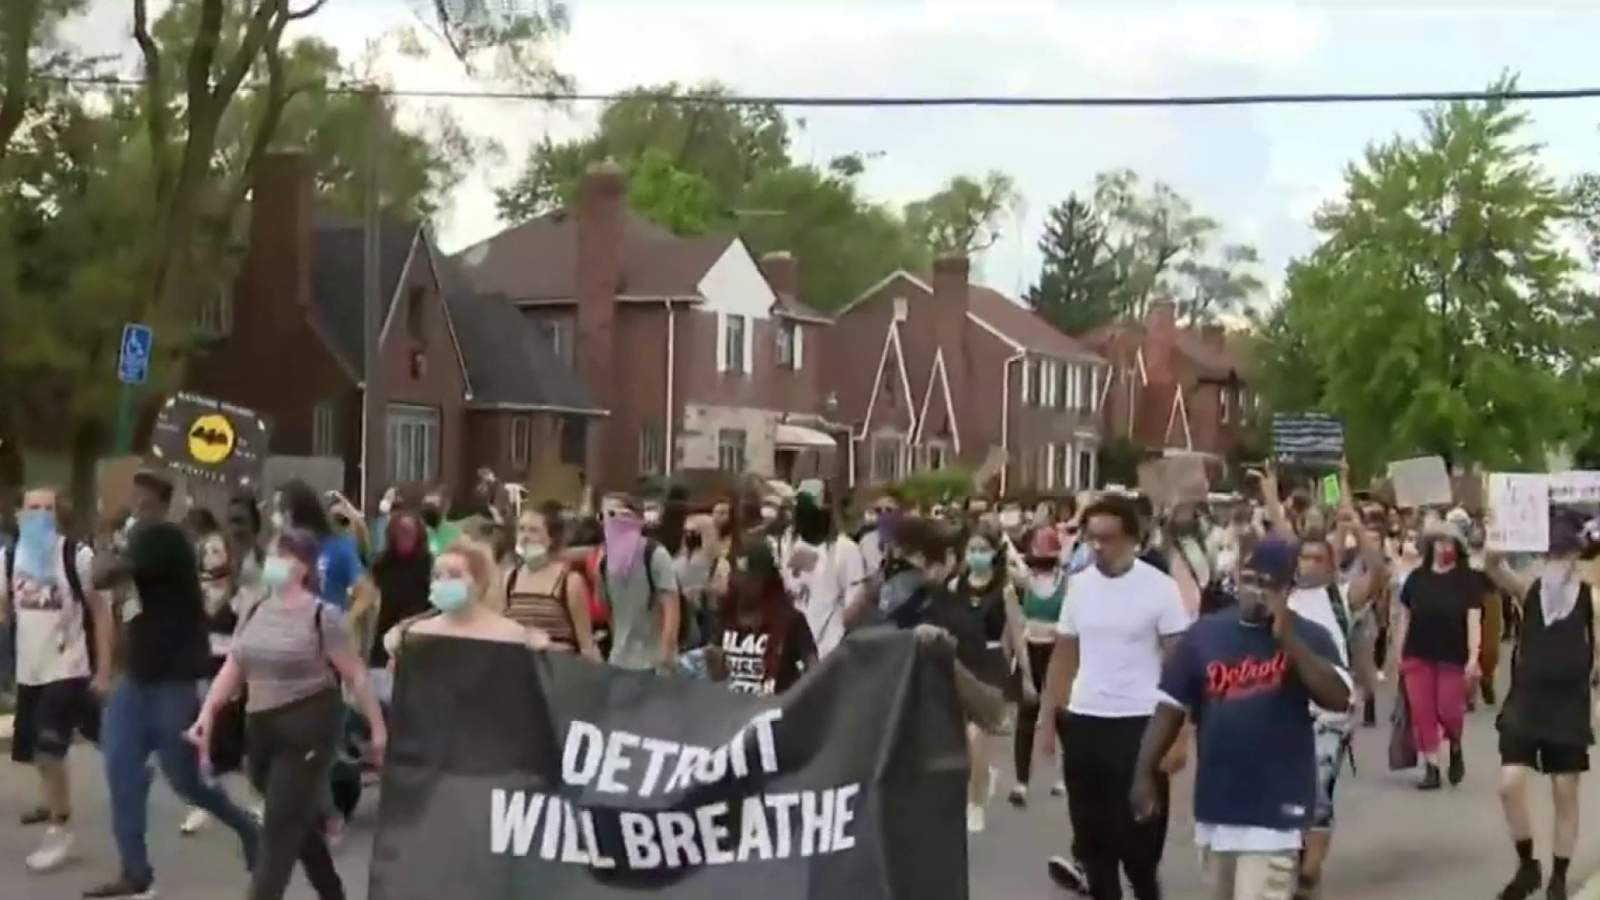 ClickOnDetroit Morning Briefing -- July 12, 2020